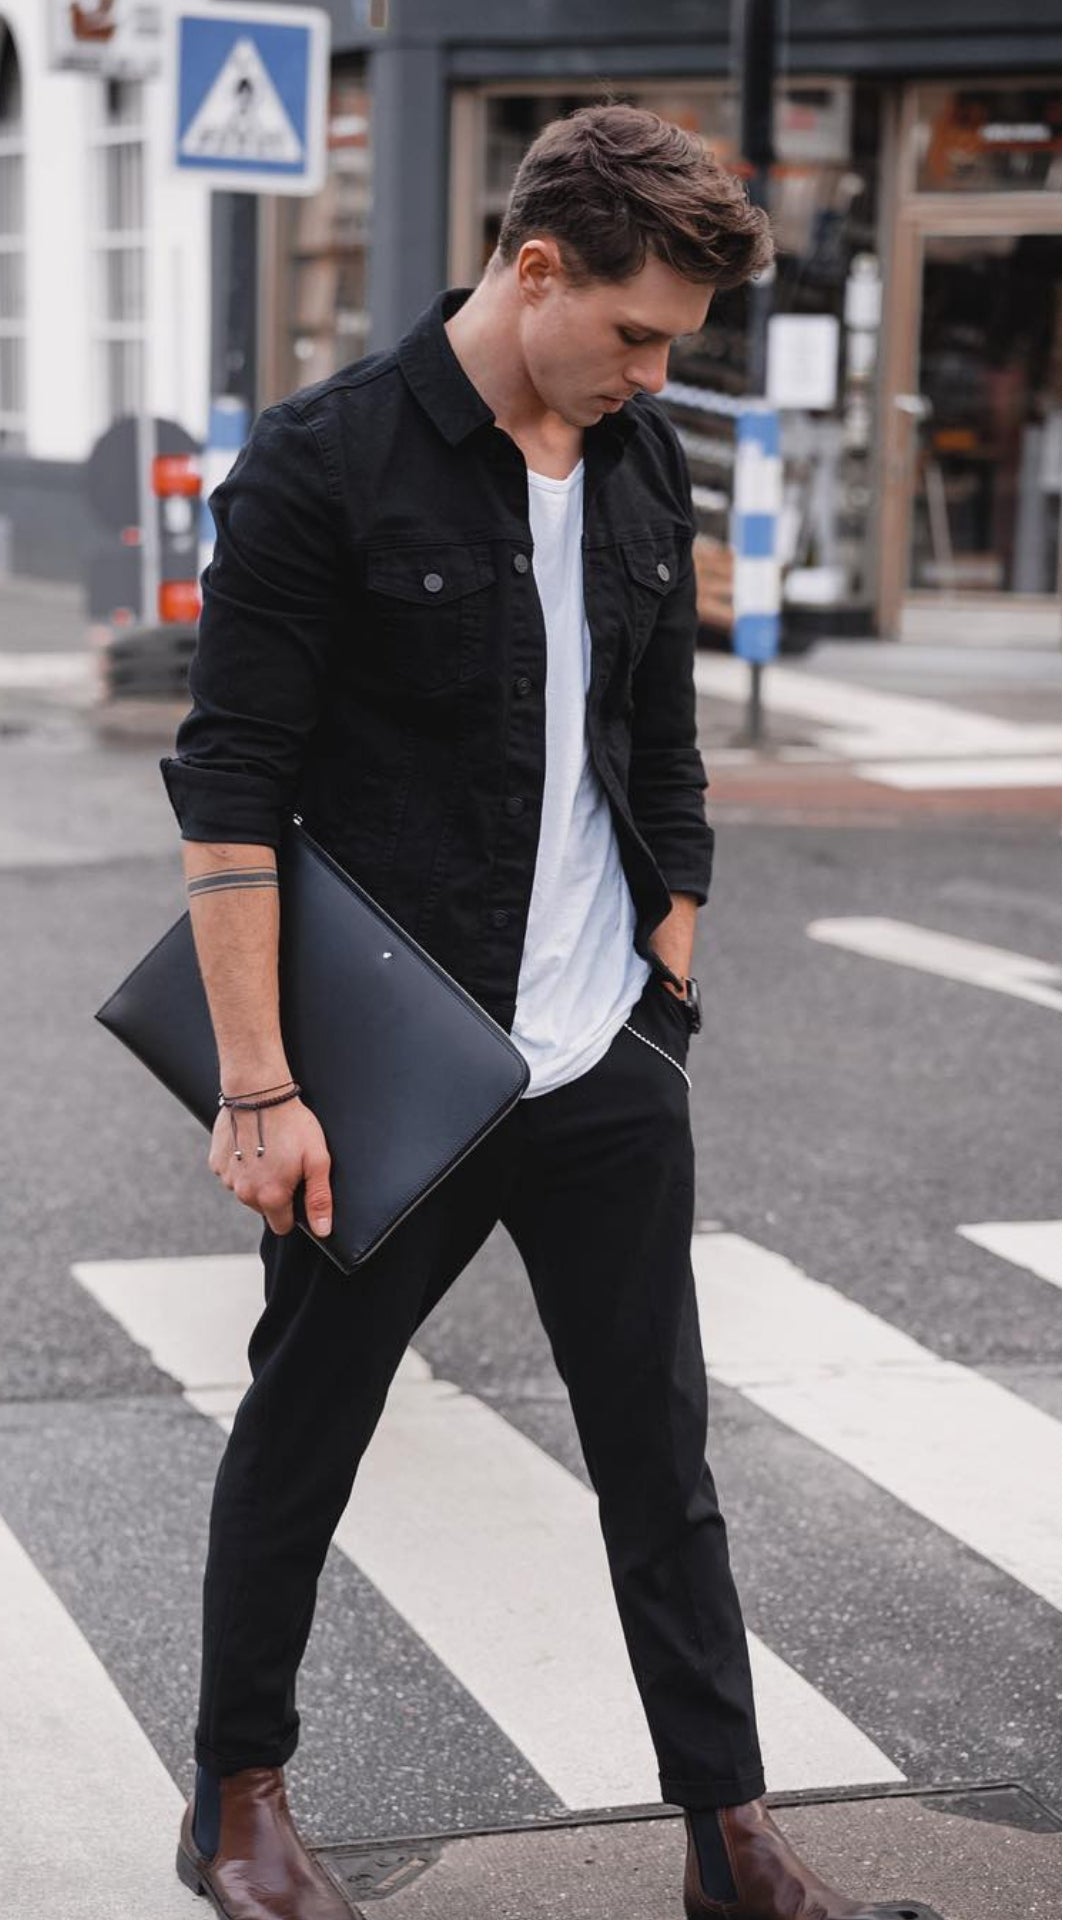 These 5 Outfit Ideas Will Help You Stand Out, Guaranteed. #street #style #mens #fashion